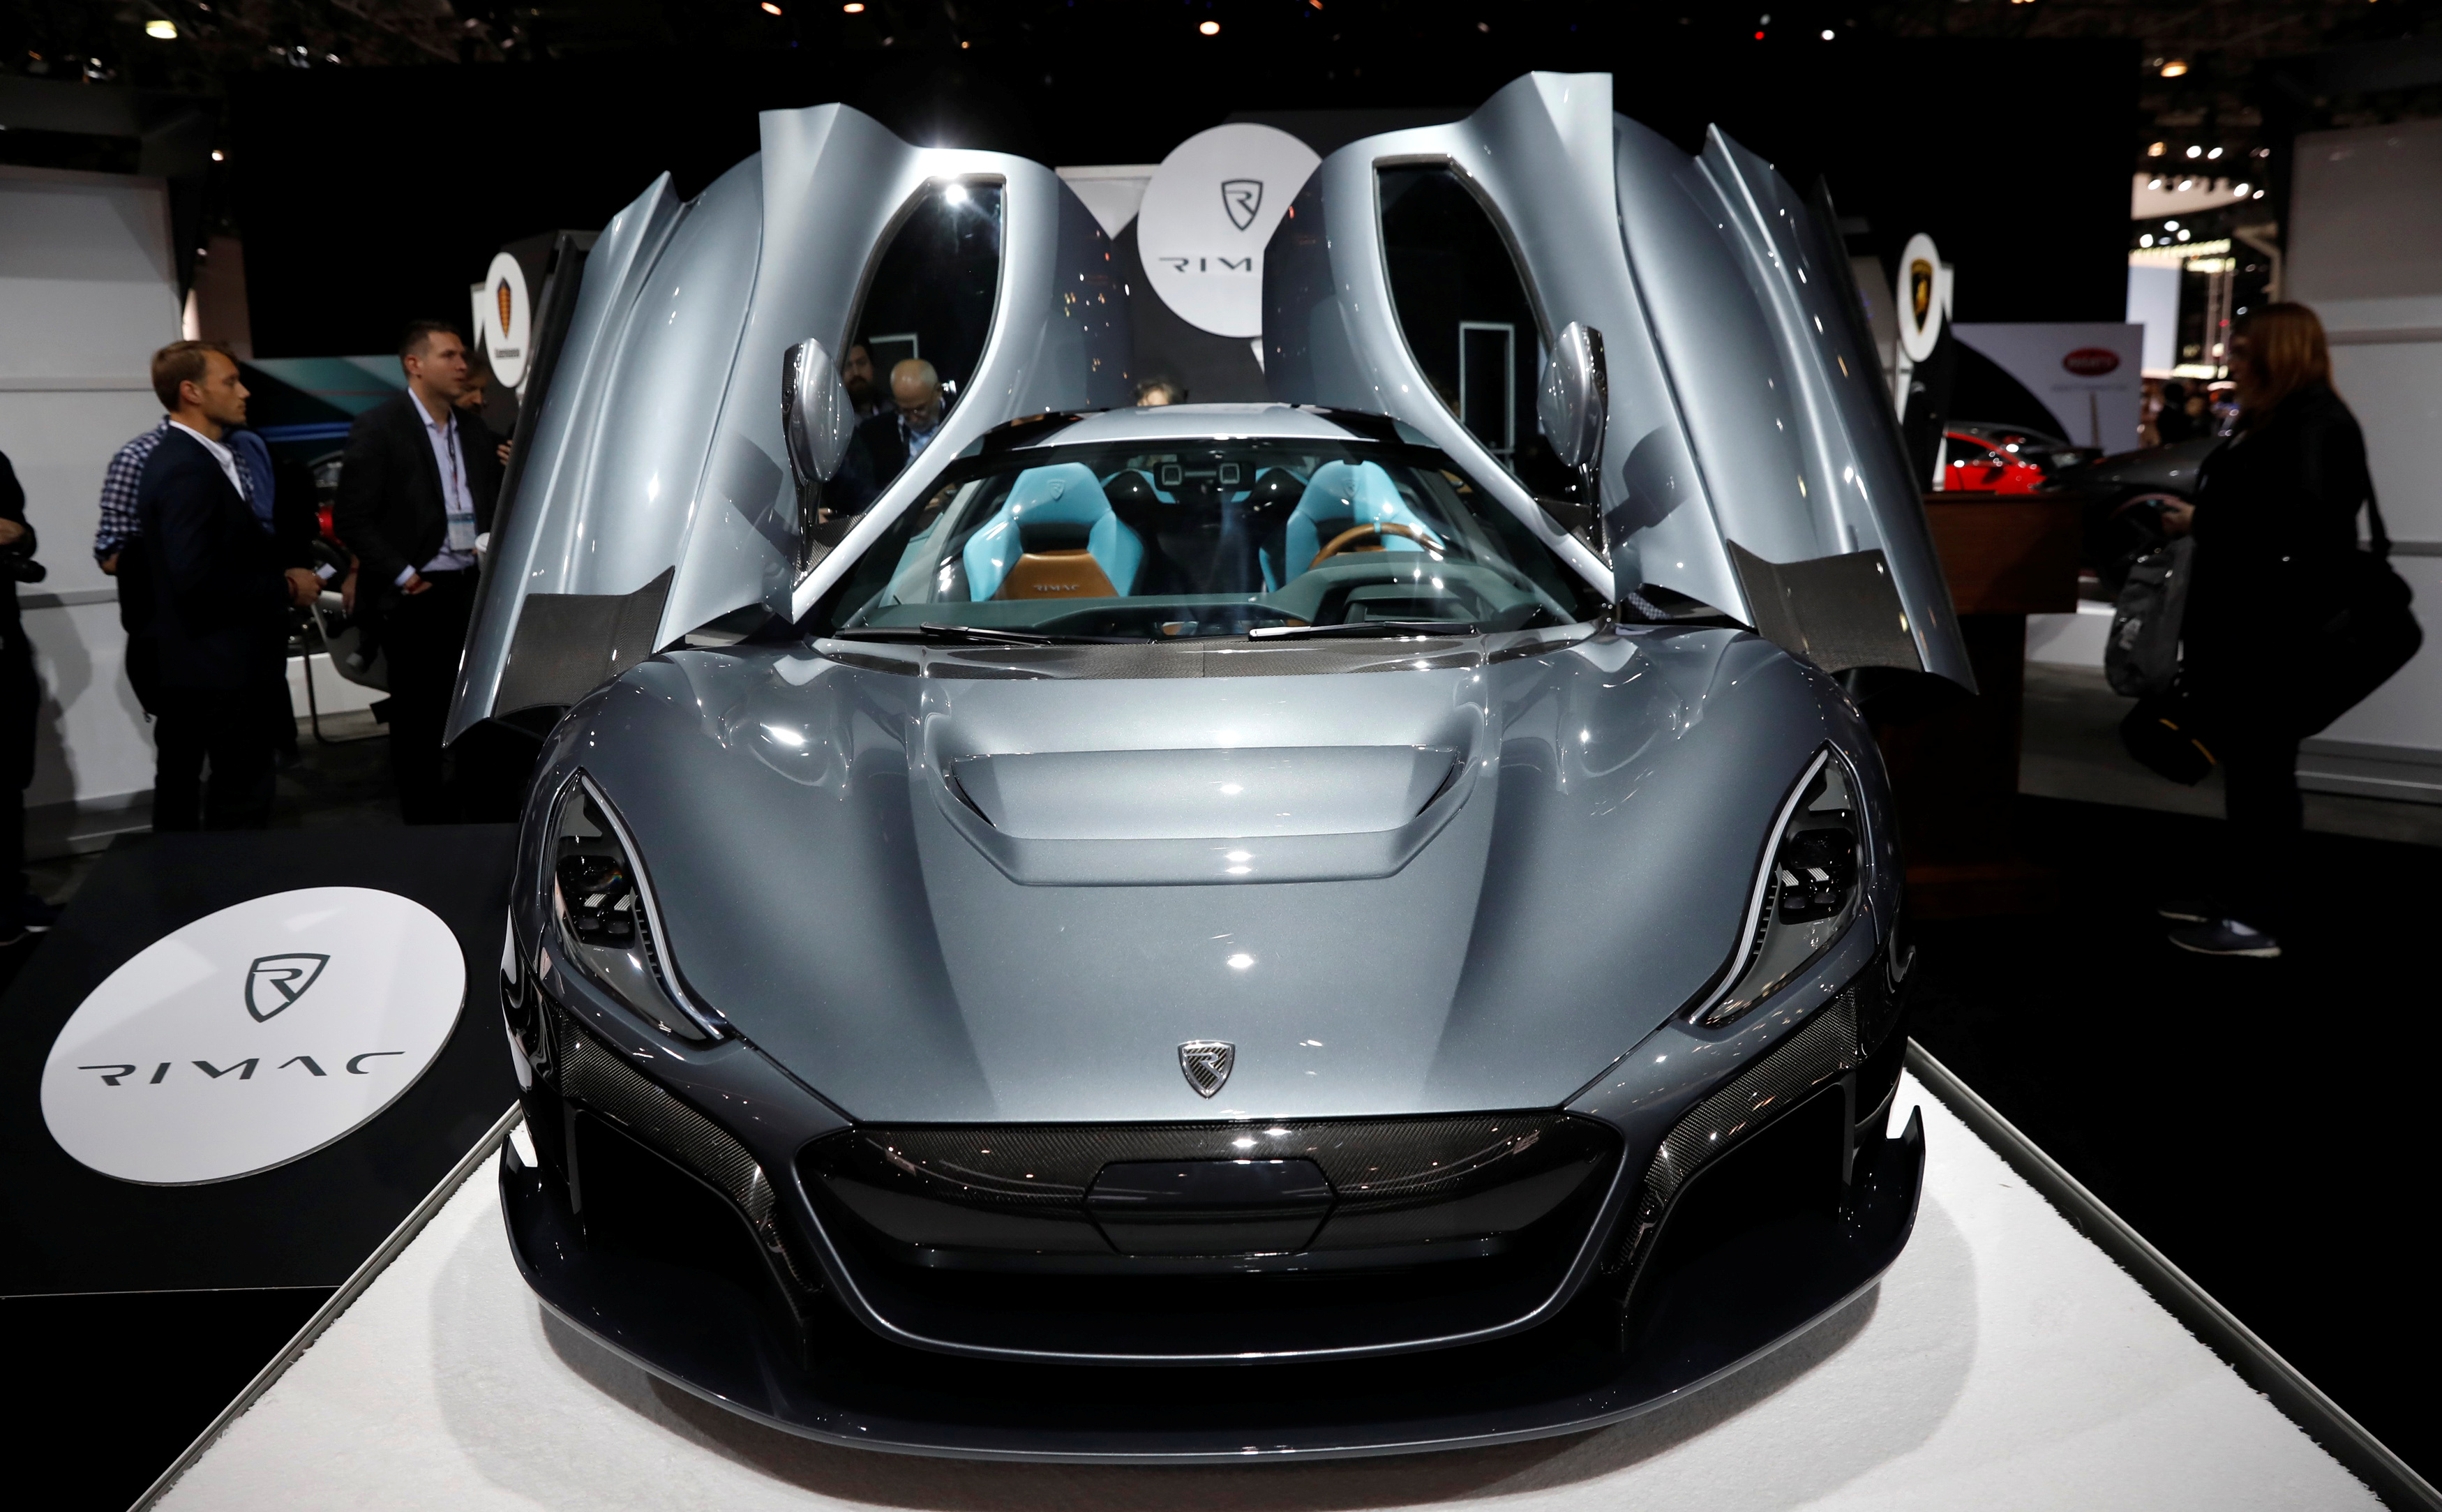 A 2019 Rimac C2 Hyper car, valued at $2.1million, is seen on display at the New York Auto Show in the Manhattan borough of New York City, New York, U.S., March 29, 2018. REUTERS/Shannon Stapleton